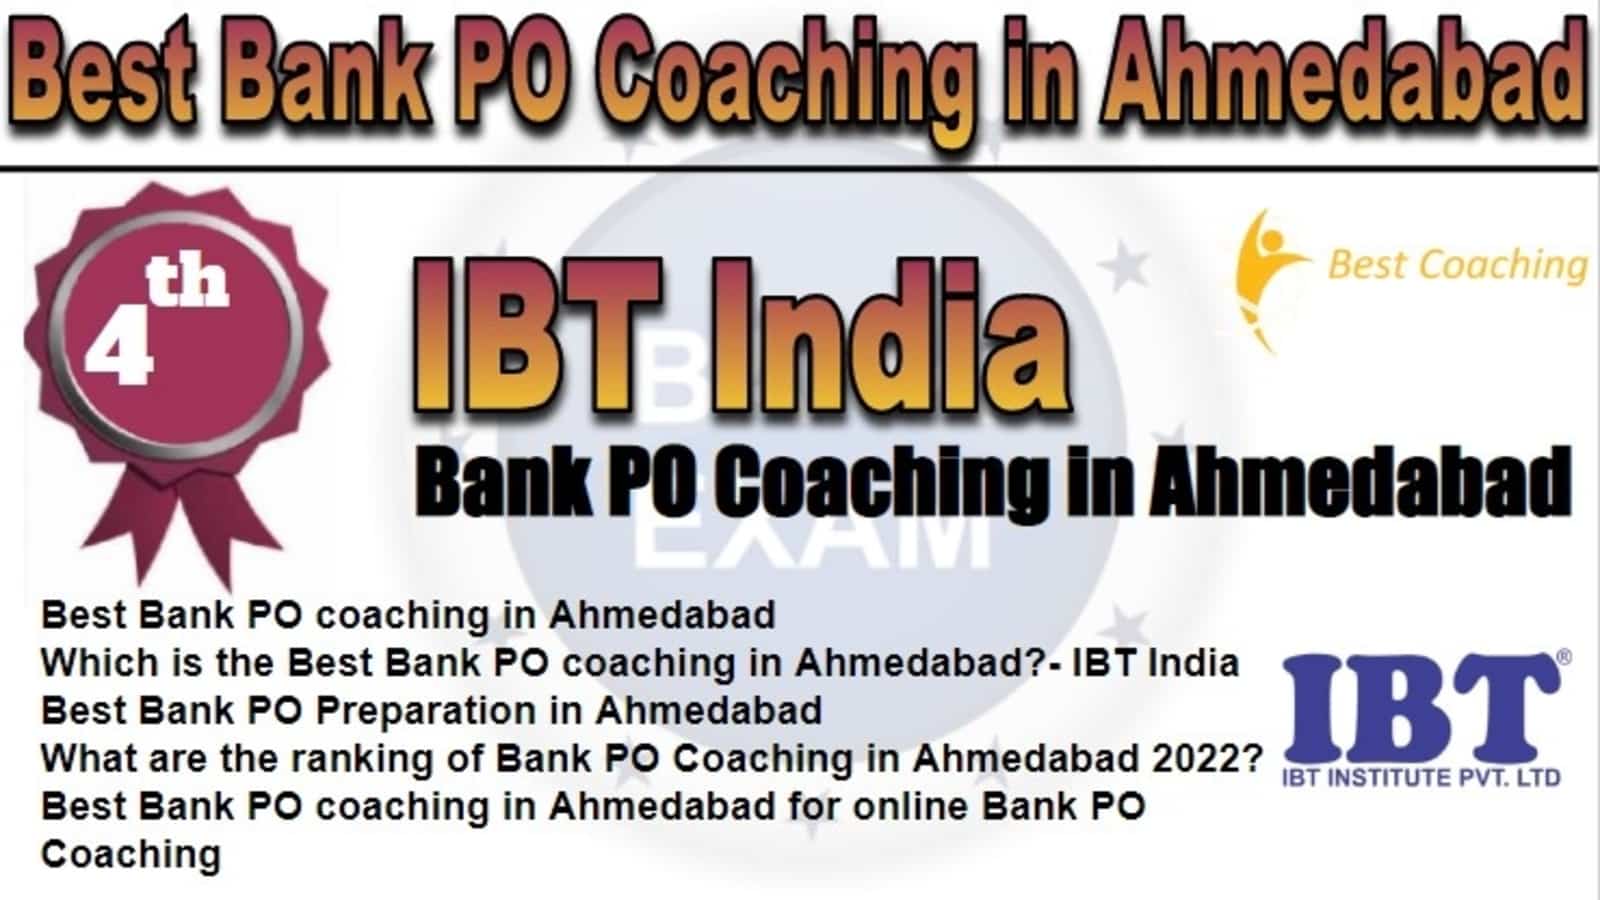 Rank 4 Best Bank PO Coaching in Ahmedabad